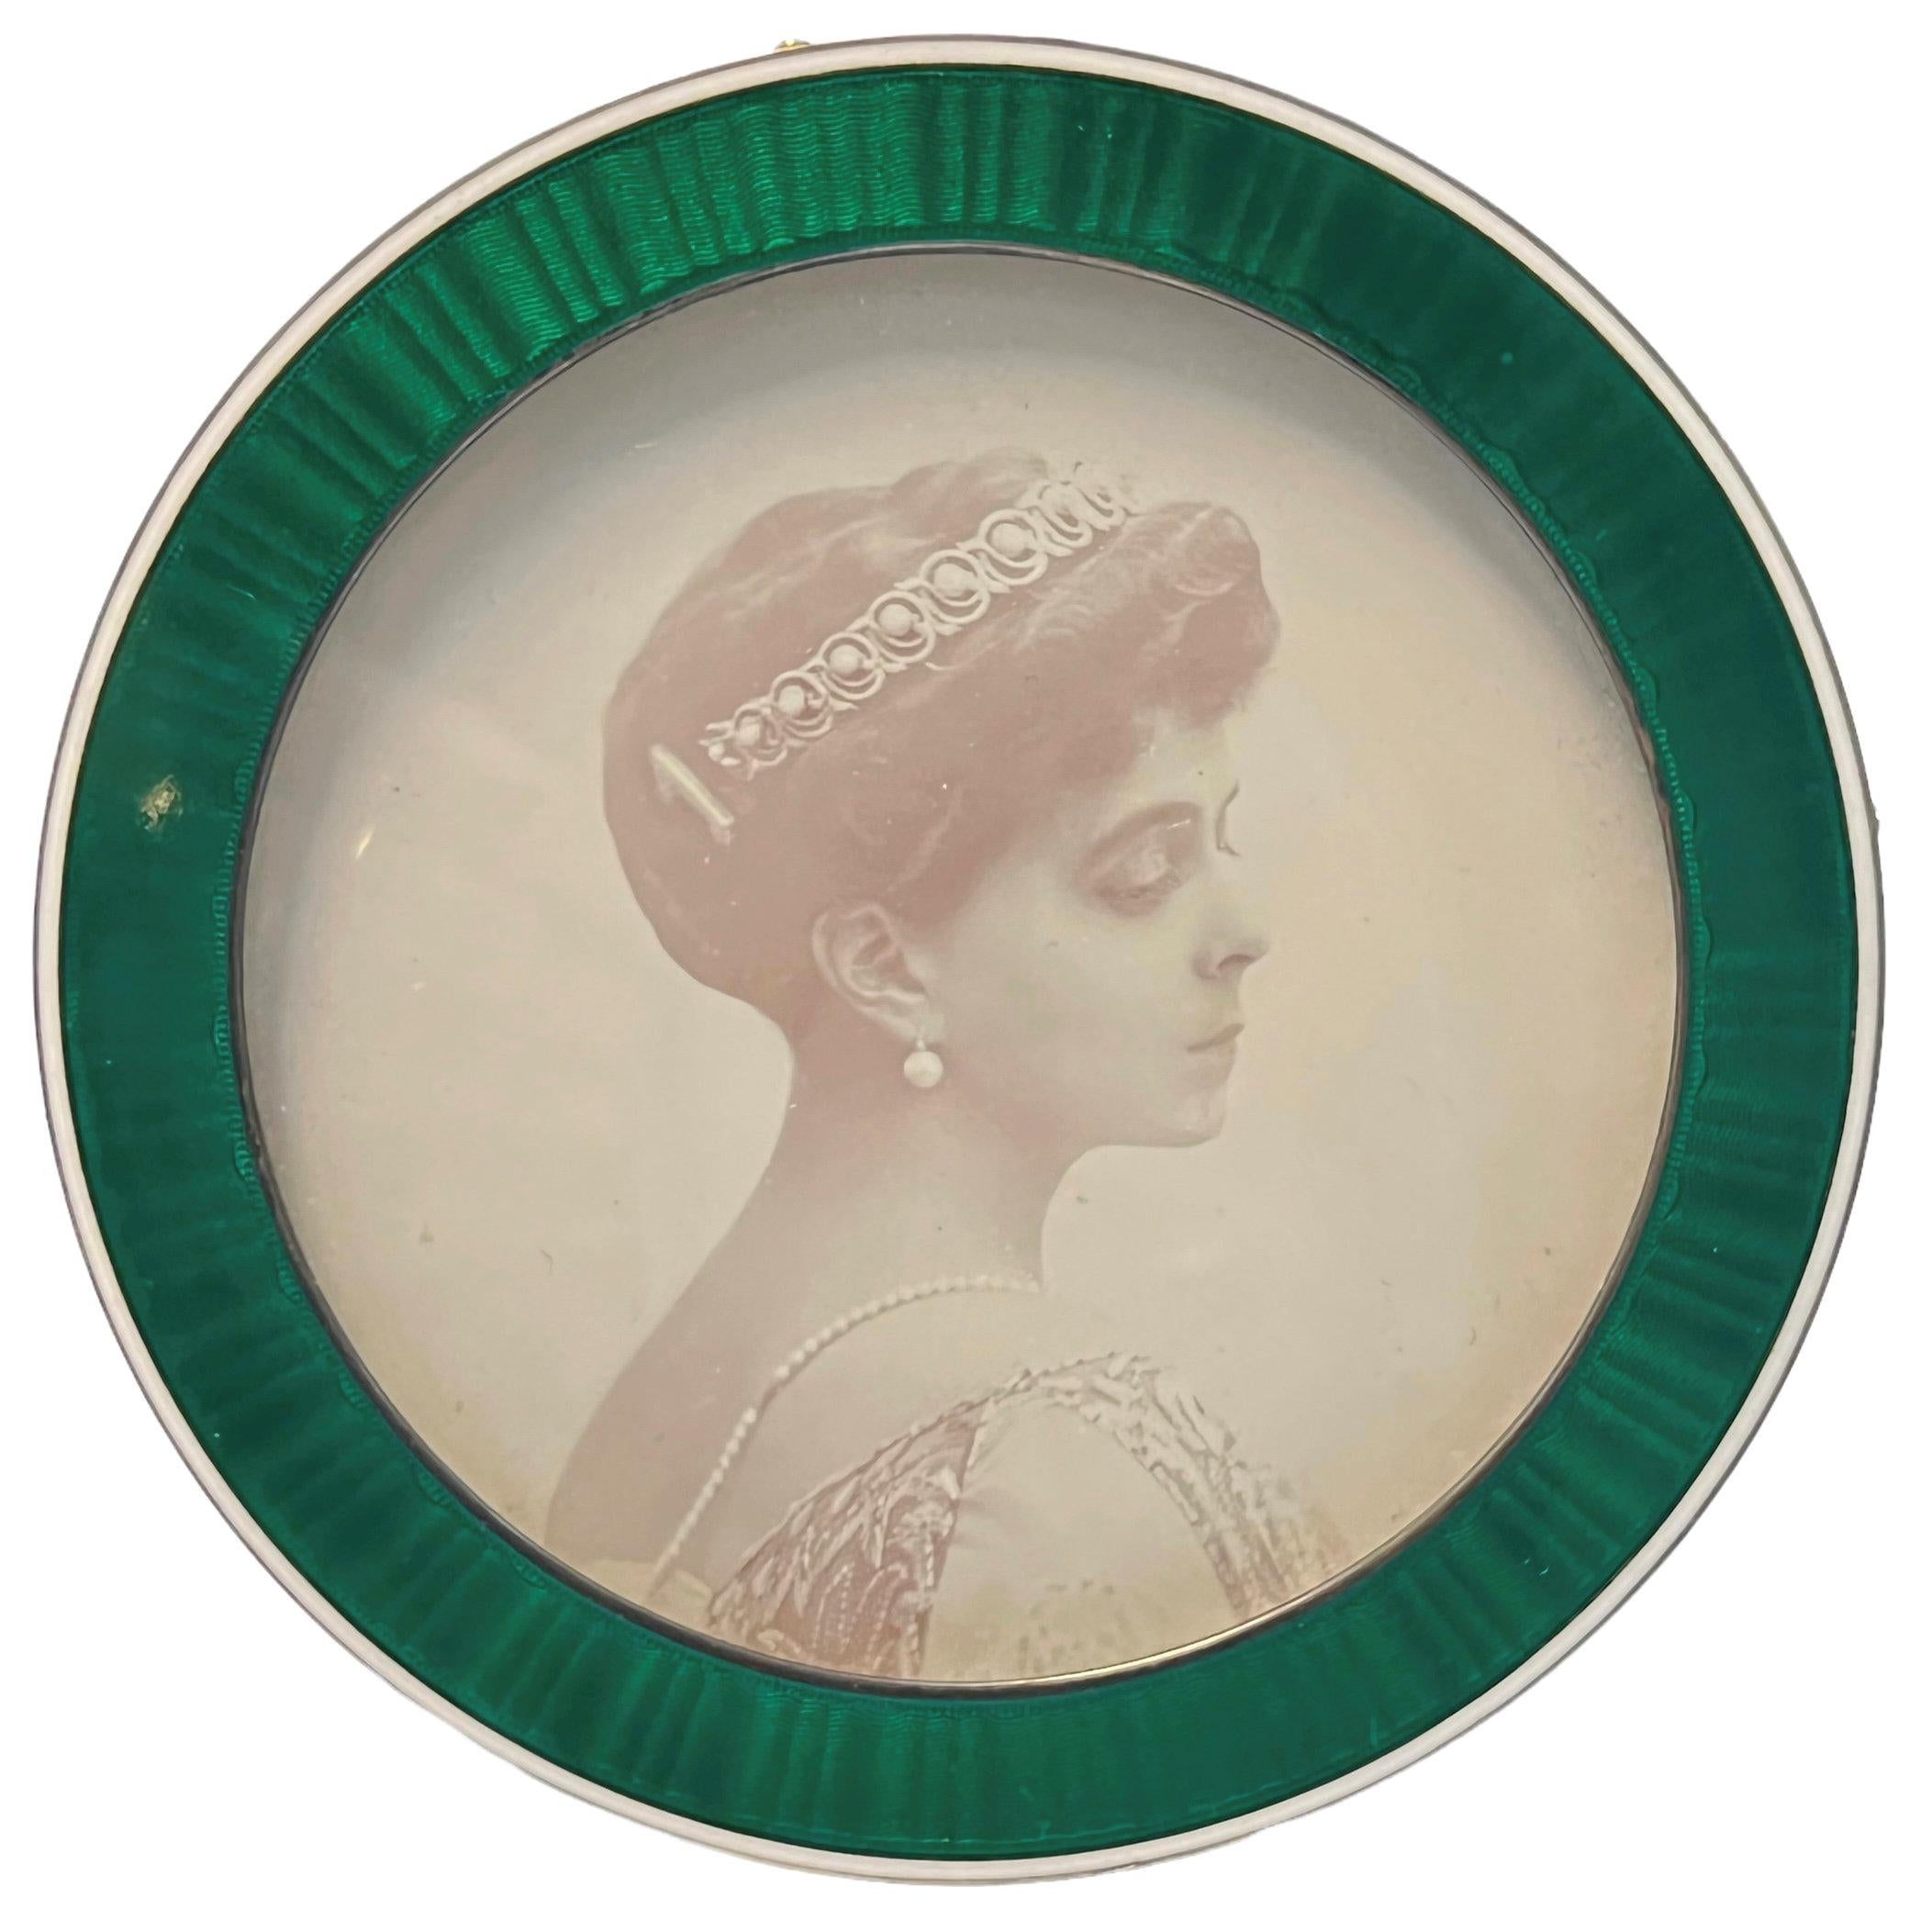 Our lovely and rare silver picture from Cartier dates from as early as the 1900s and features an outer ring of green enamel and its original leather covered and lined gift box.